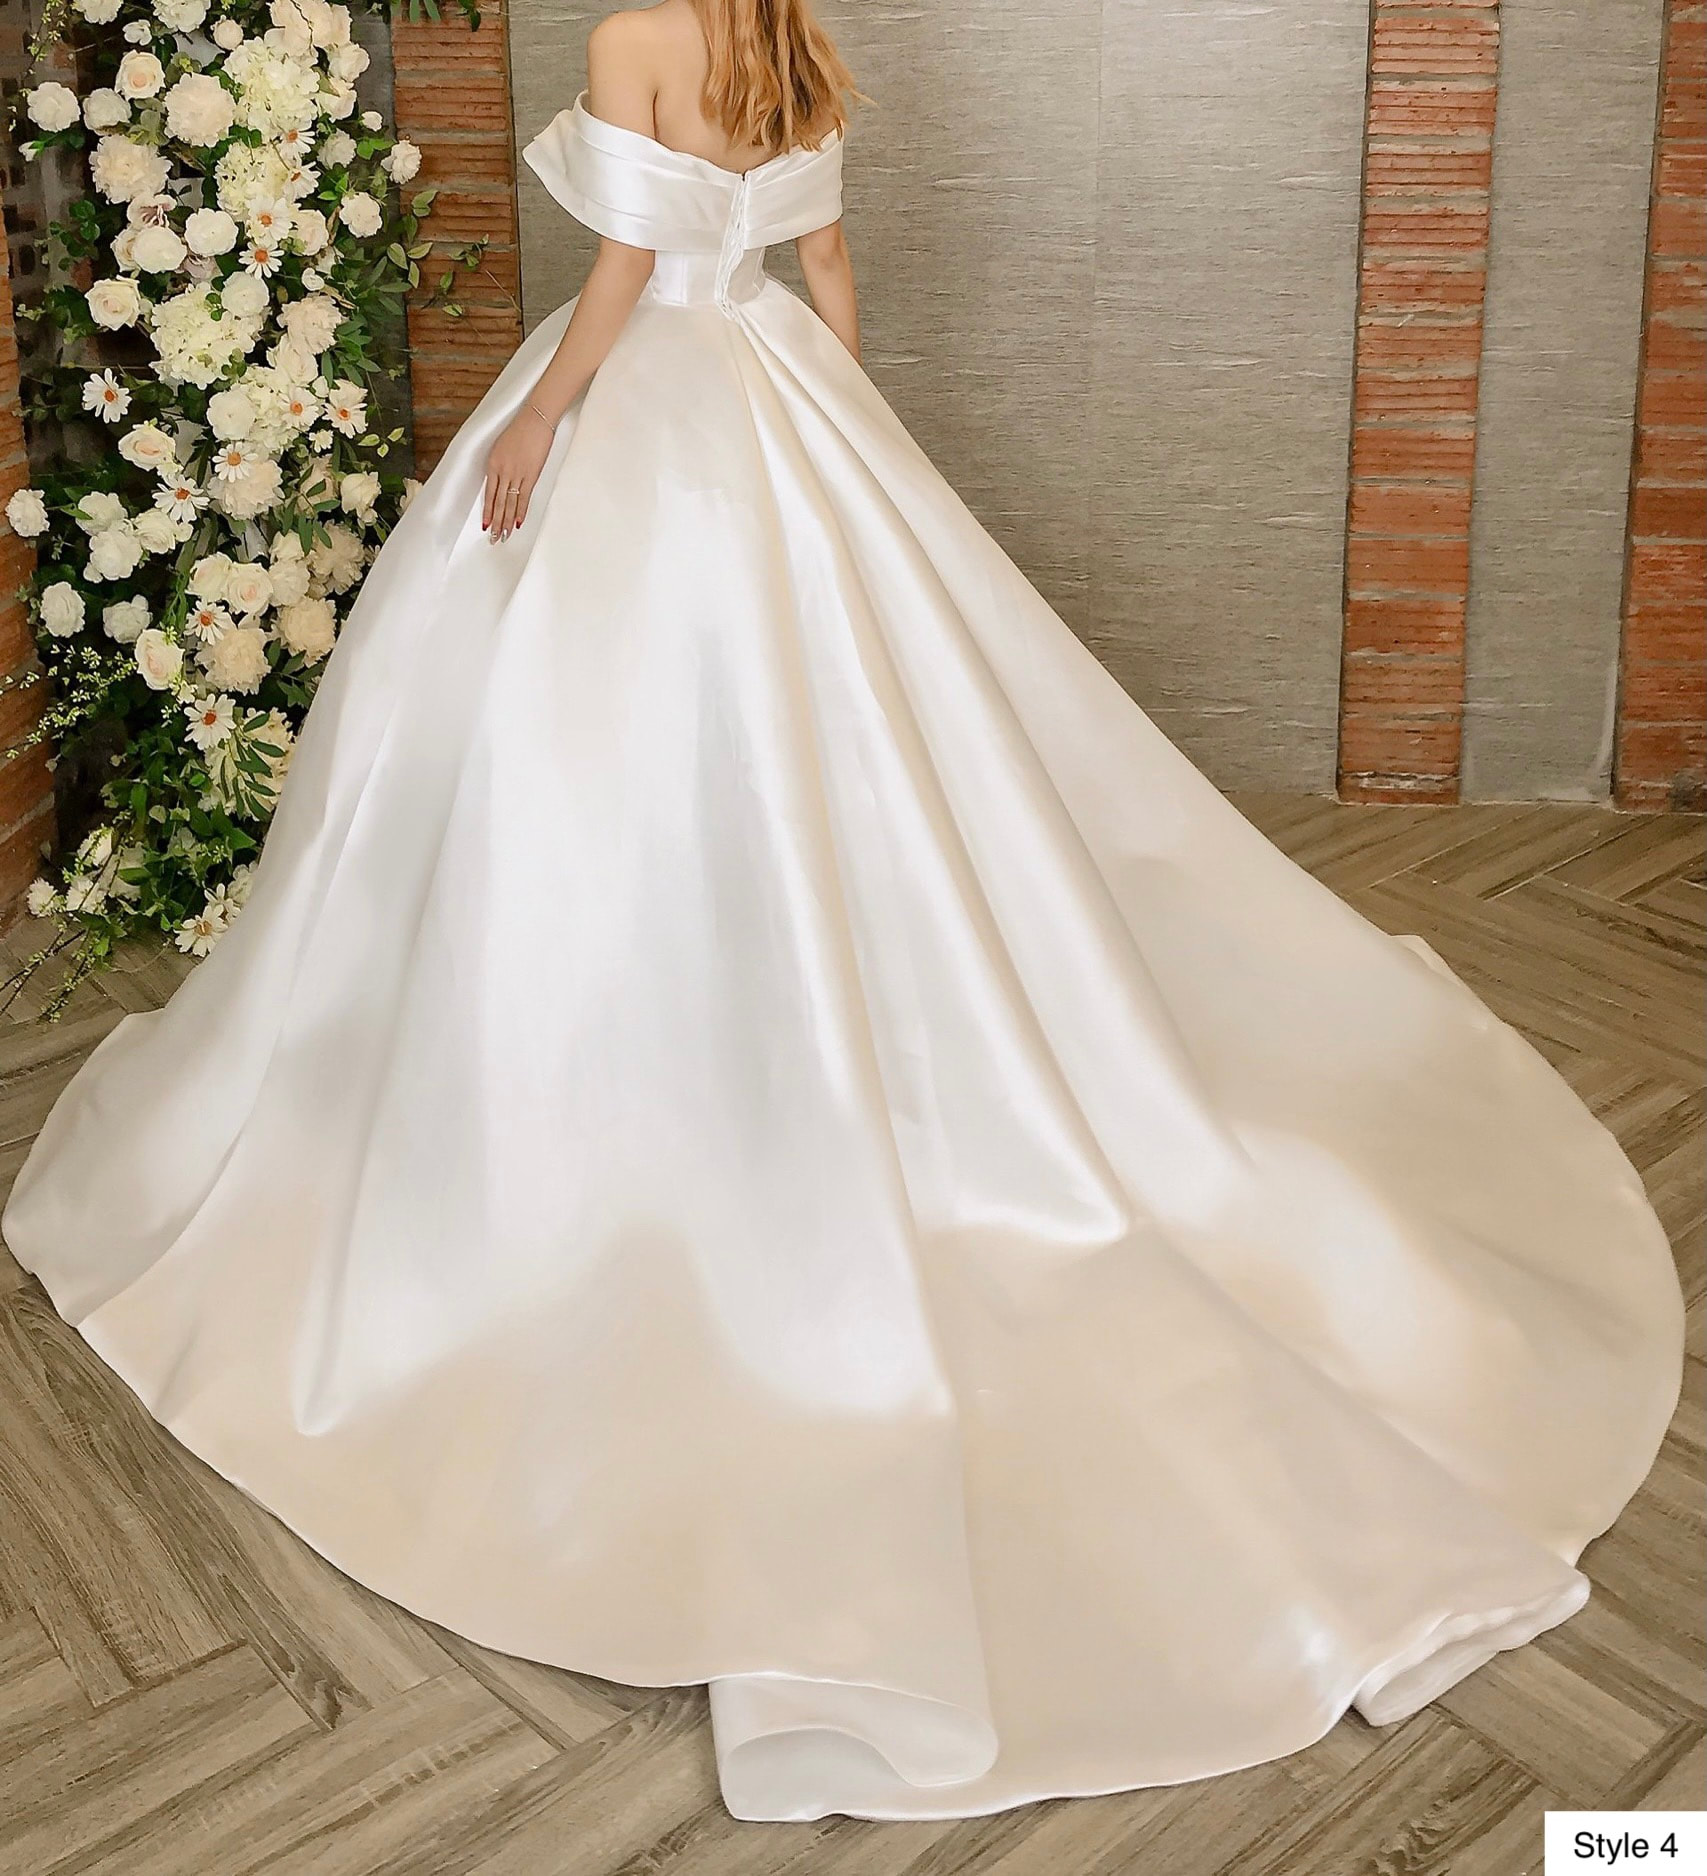 Off The Shoulder Elegant White Satin Ball Gown Wedding Dress With Train Various Styles 5891